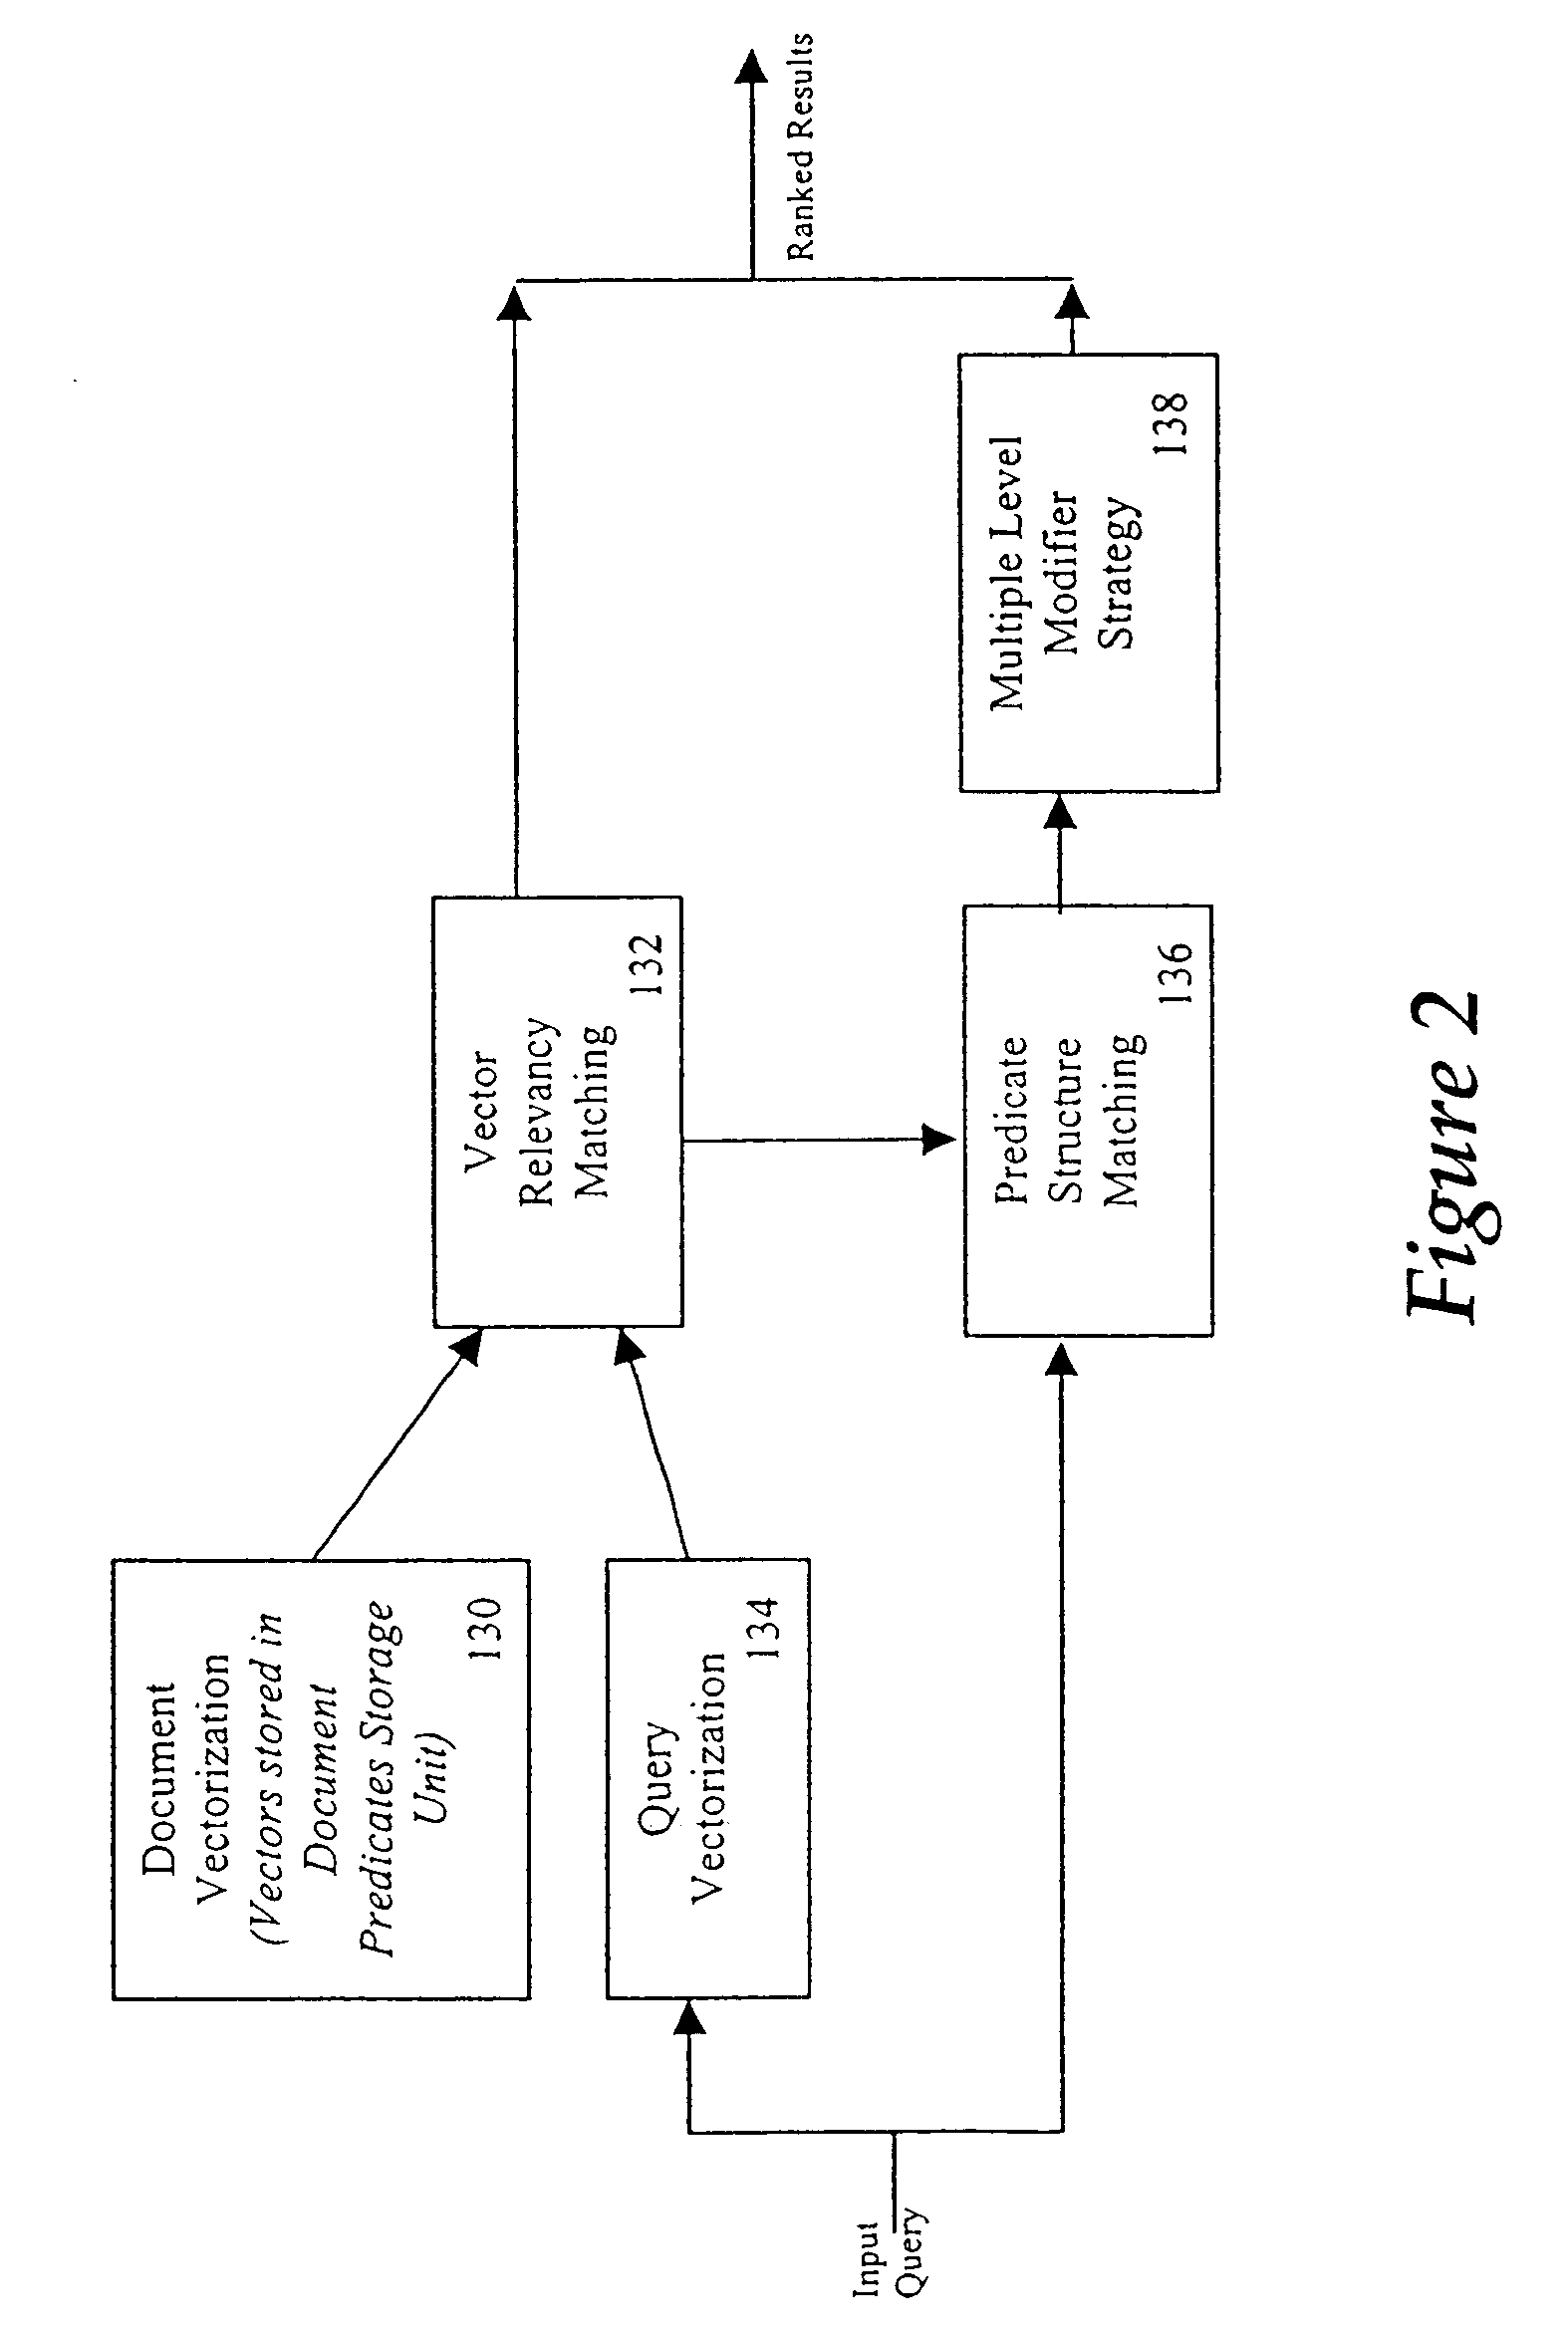 Method and system of ranking and clustering for document indexing and retrieval